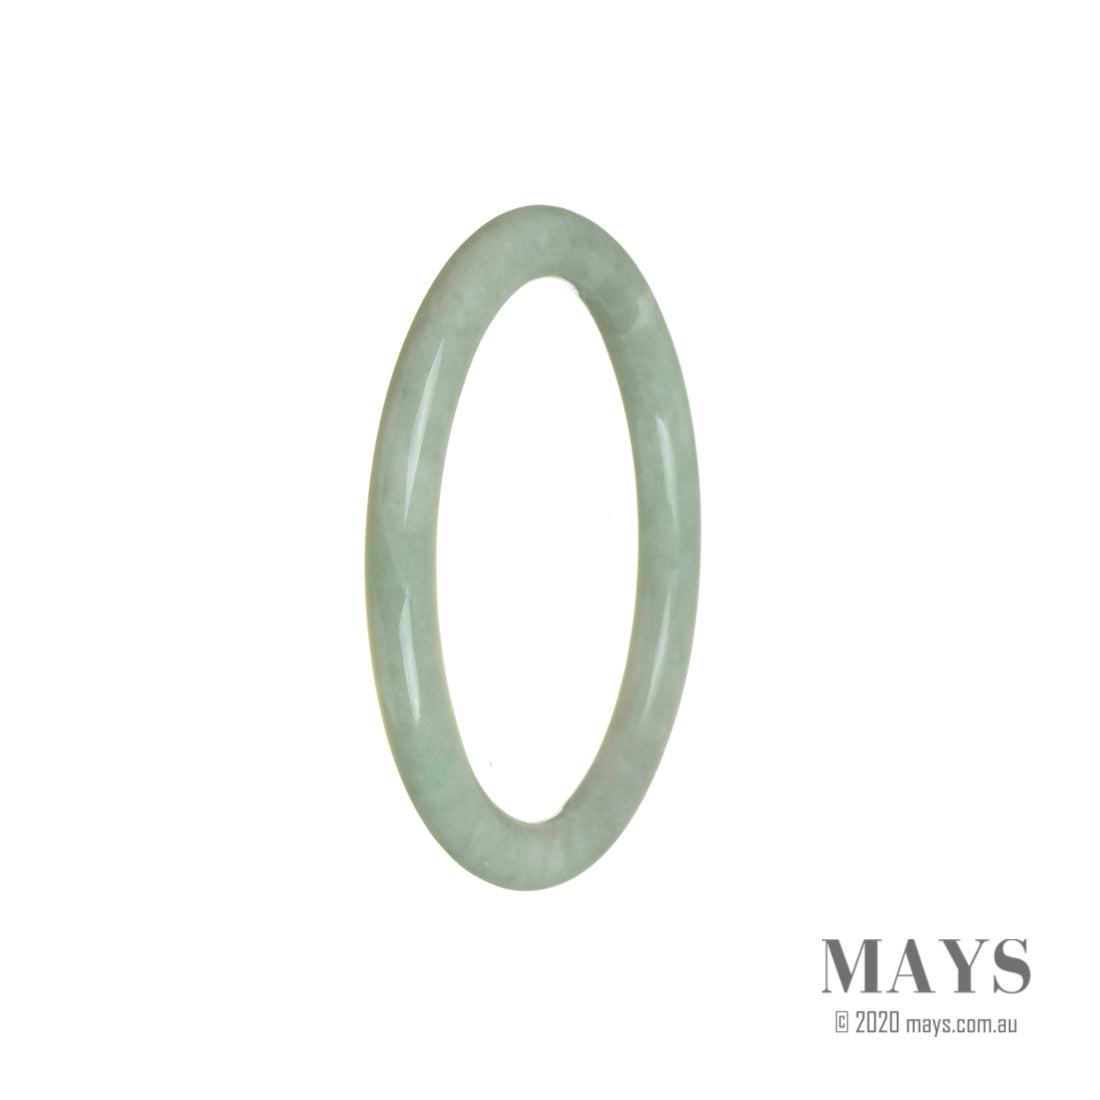 A close-up photo of a delicate green Burma jade bracelet, measuring 55mm in diameter. The bracelet is made with authentic grade A jade, showcasing its natural beauty and intricate patterns. The thin design adds a touch of elegance to any outfit. Created by MAYS, a trusted brand in jade jewelry.